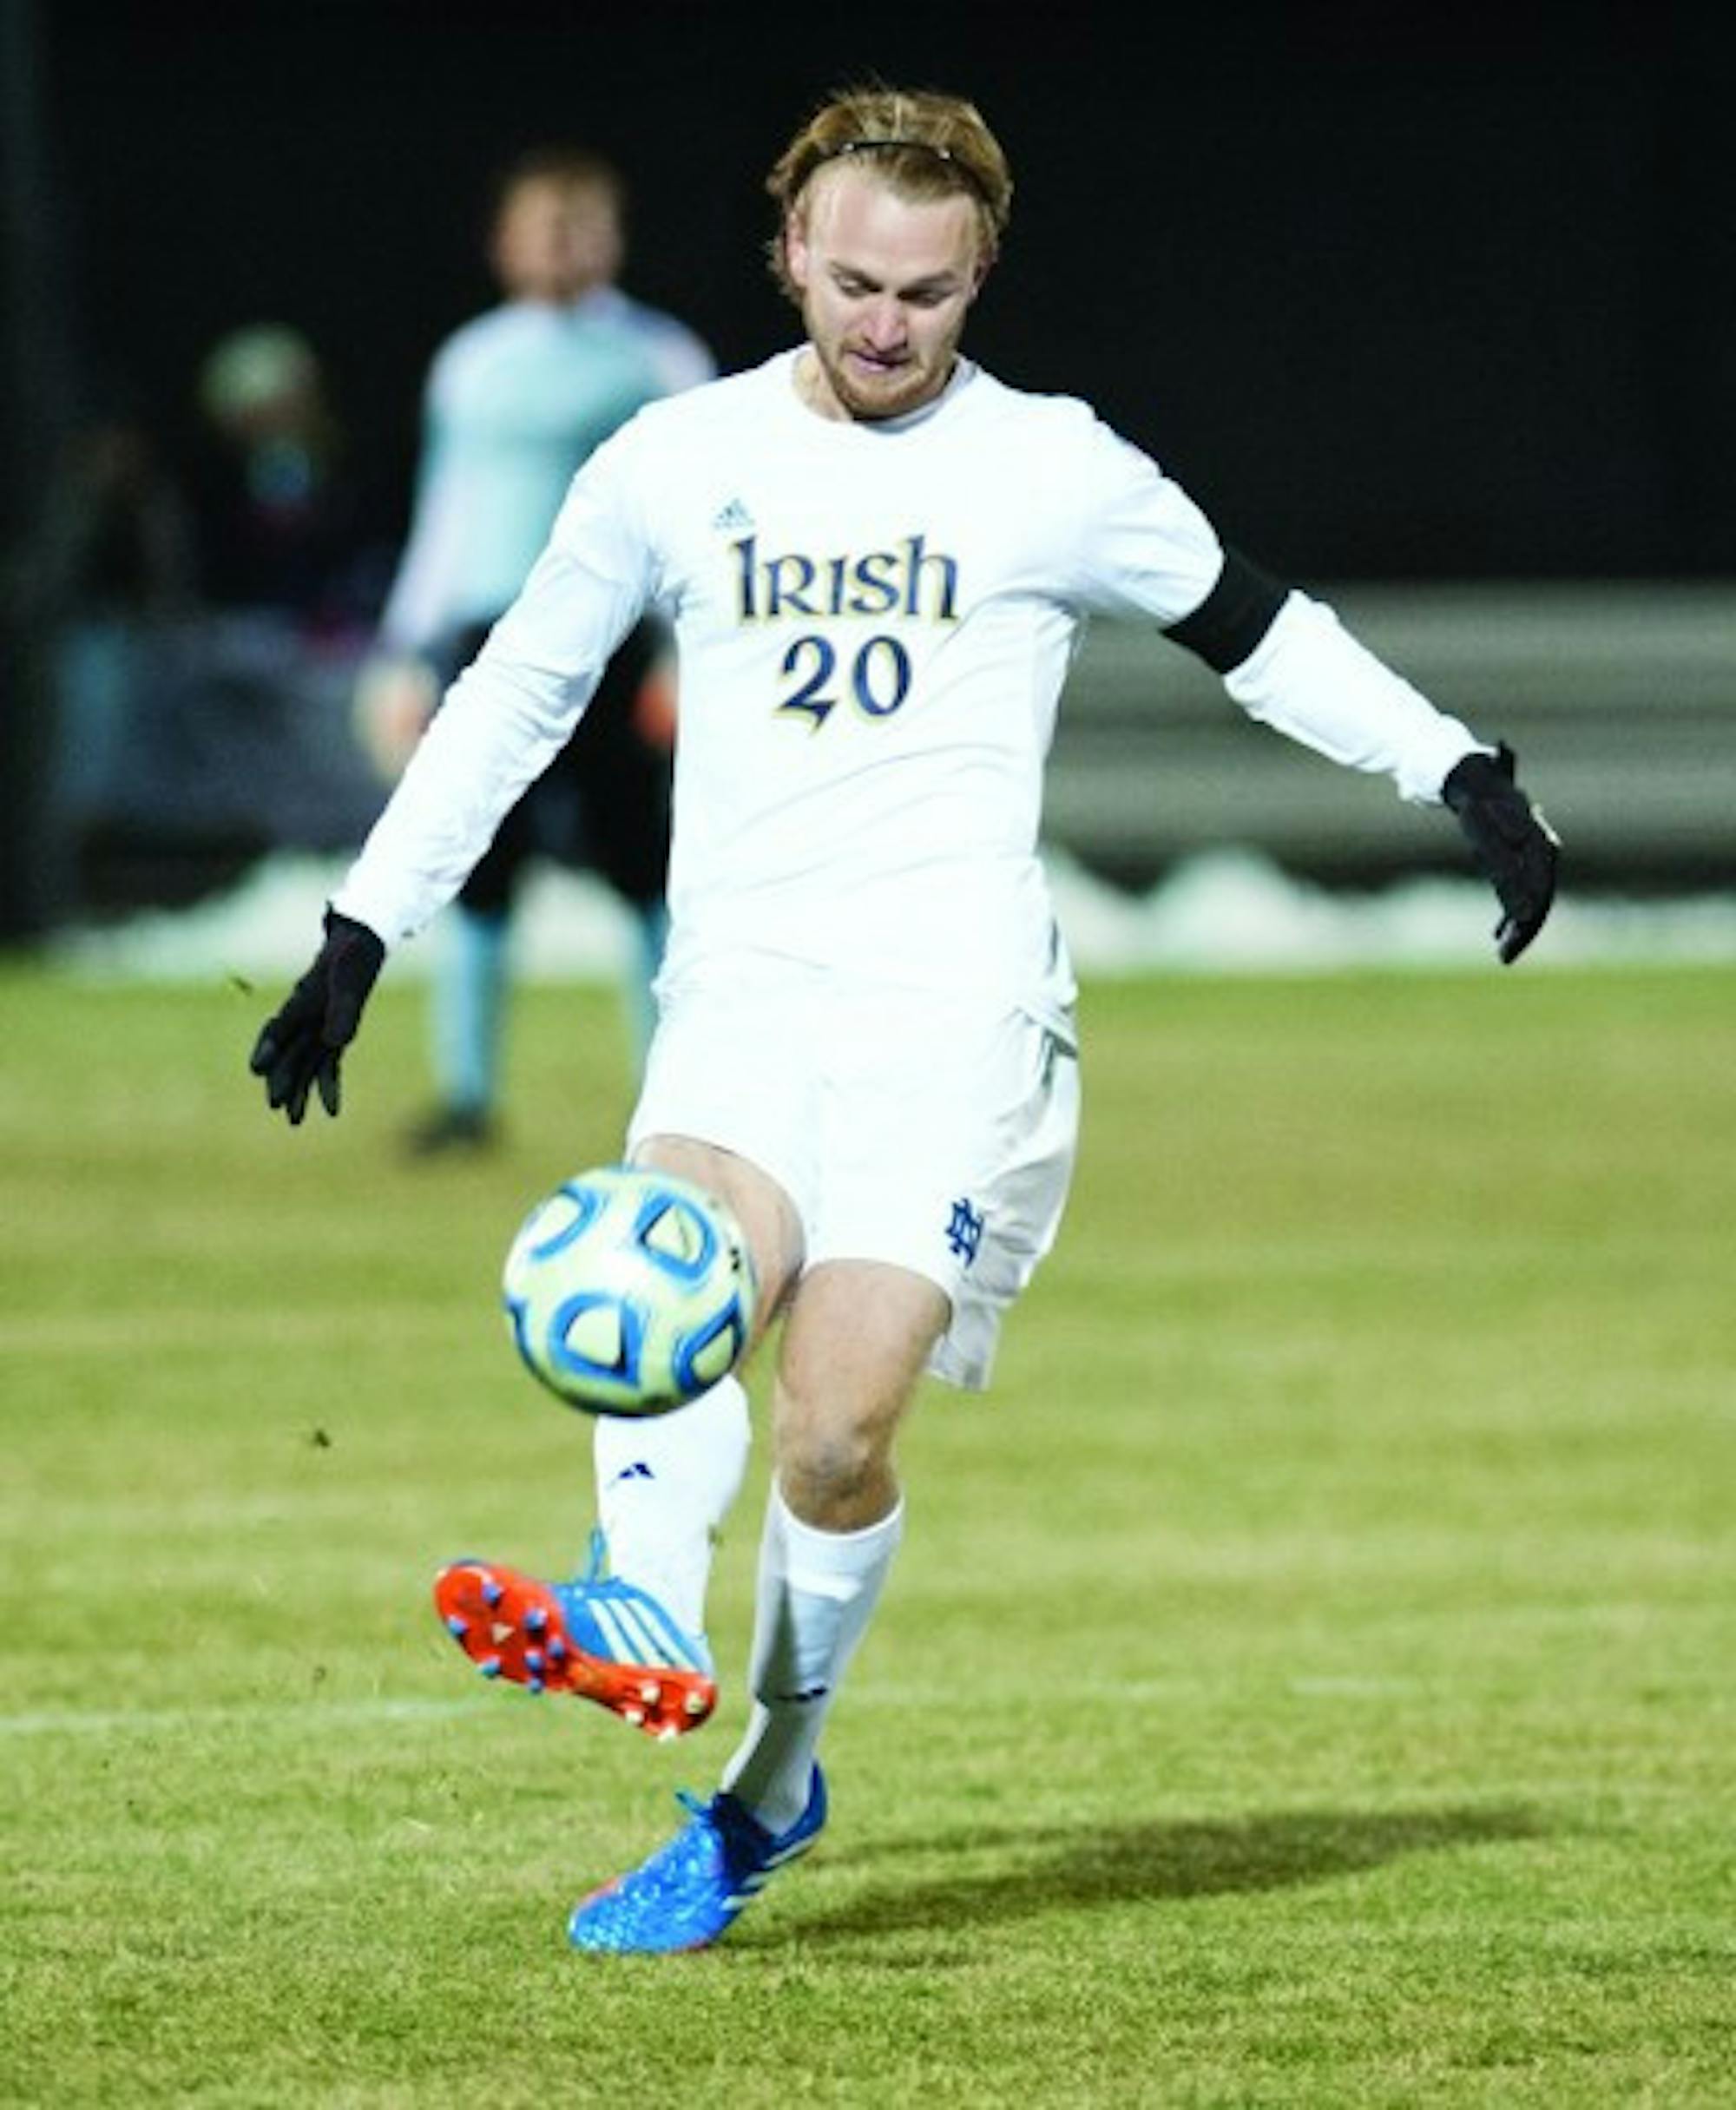 Former Irish center back Grant Van De Casteele passes in Notre Dame’s 4-0 win Nov. 24, 2013, against Wisconsin. Casteele was drafted by the Colorado Rapids in the first round of the MLS draft Thursday.